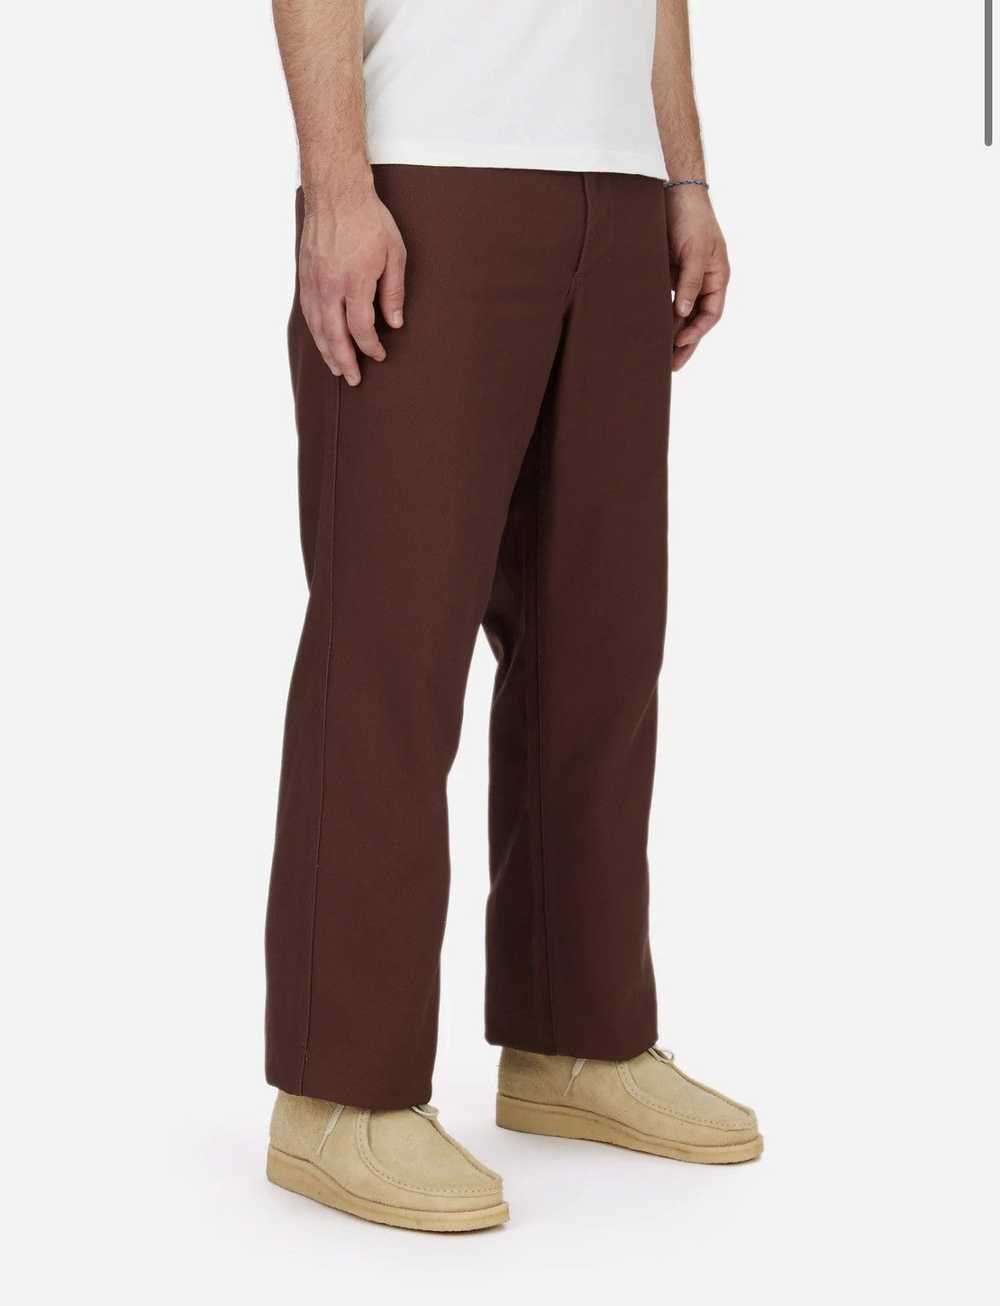 3sixteen Work Pant in Espresso Twill - image 2